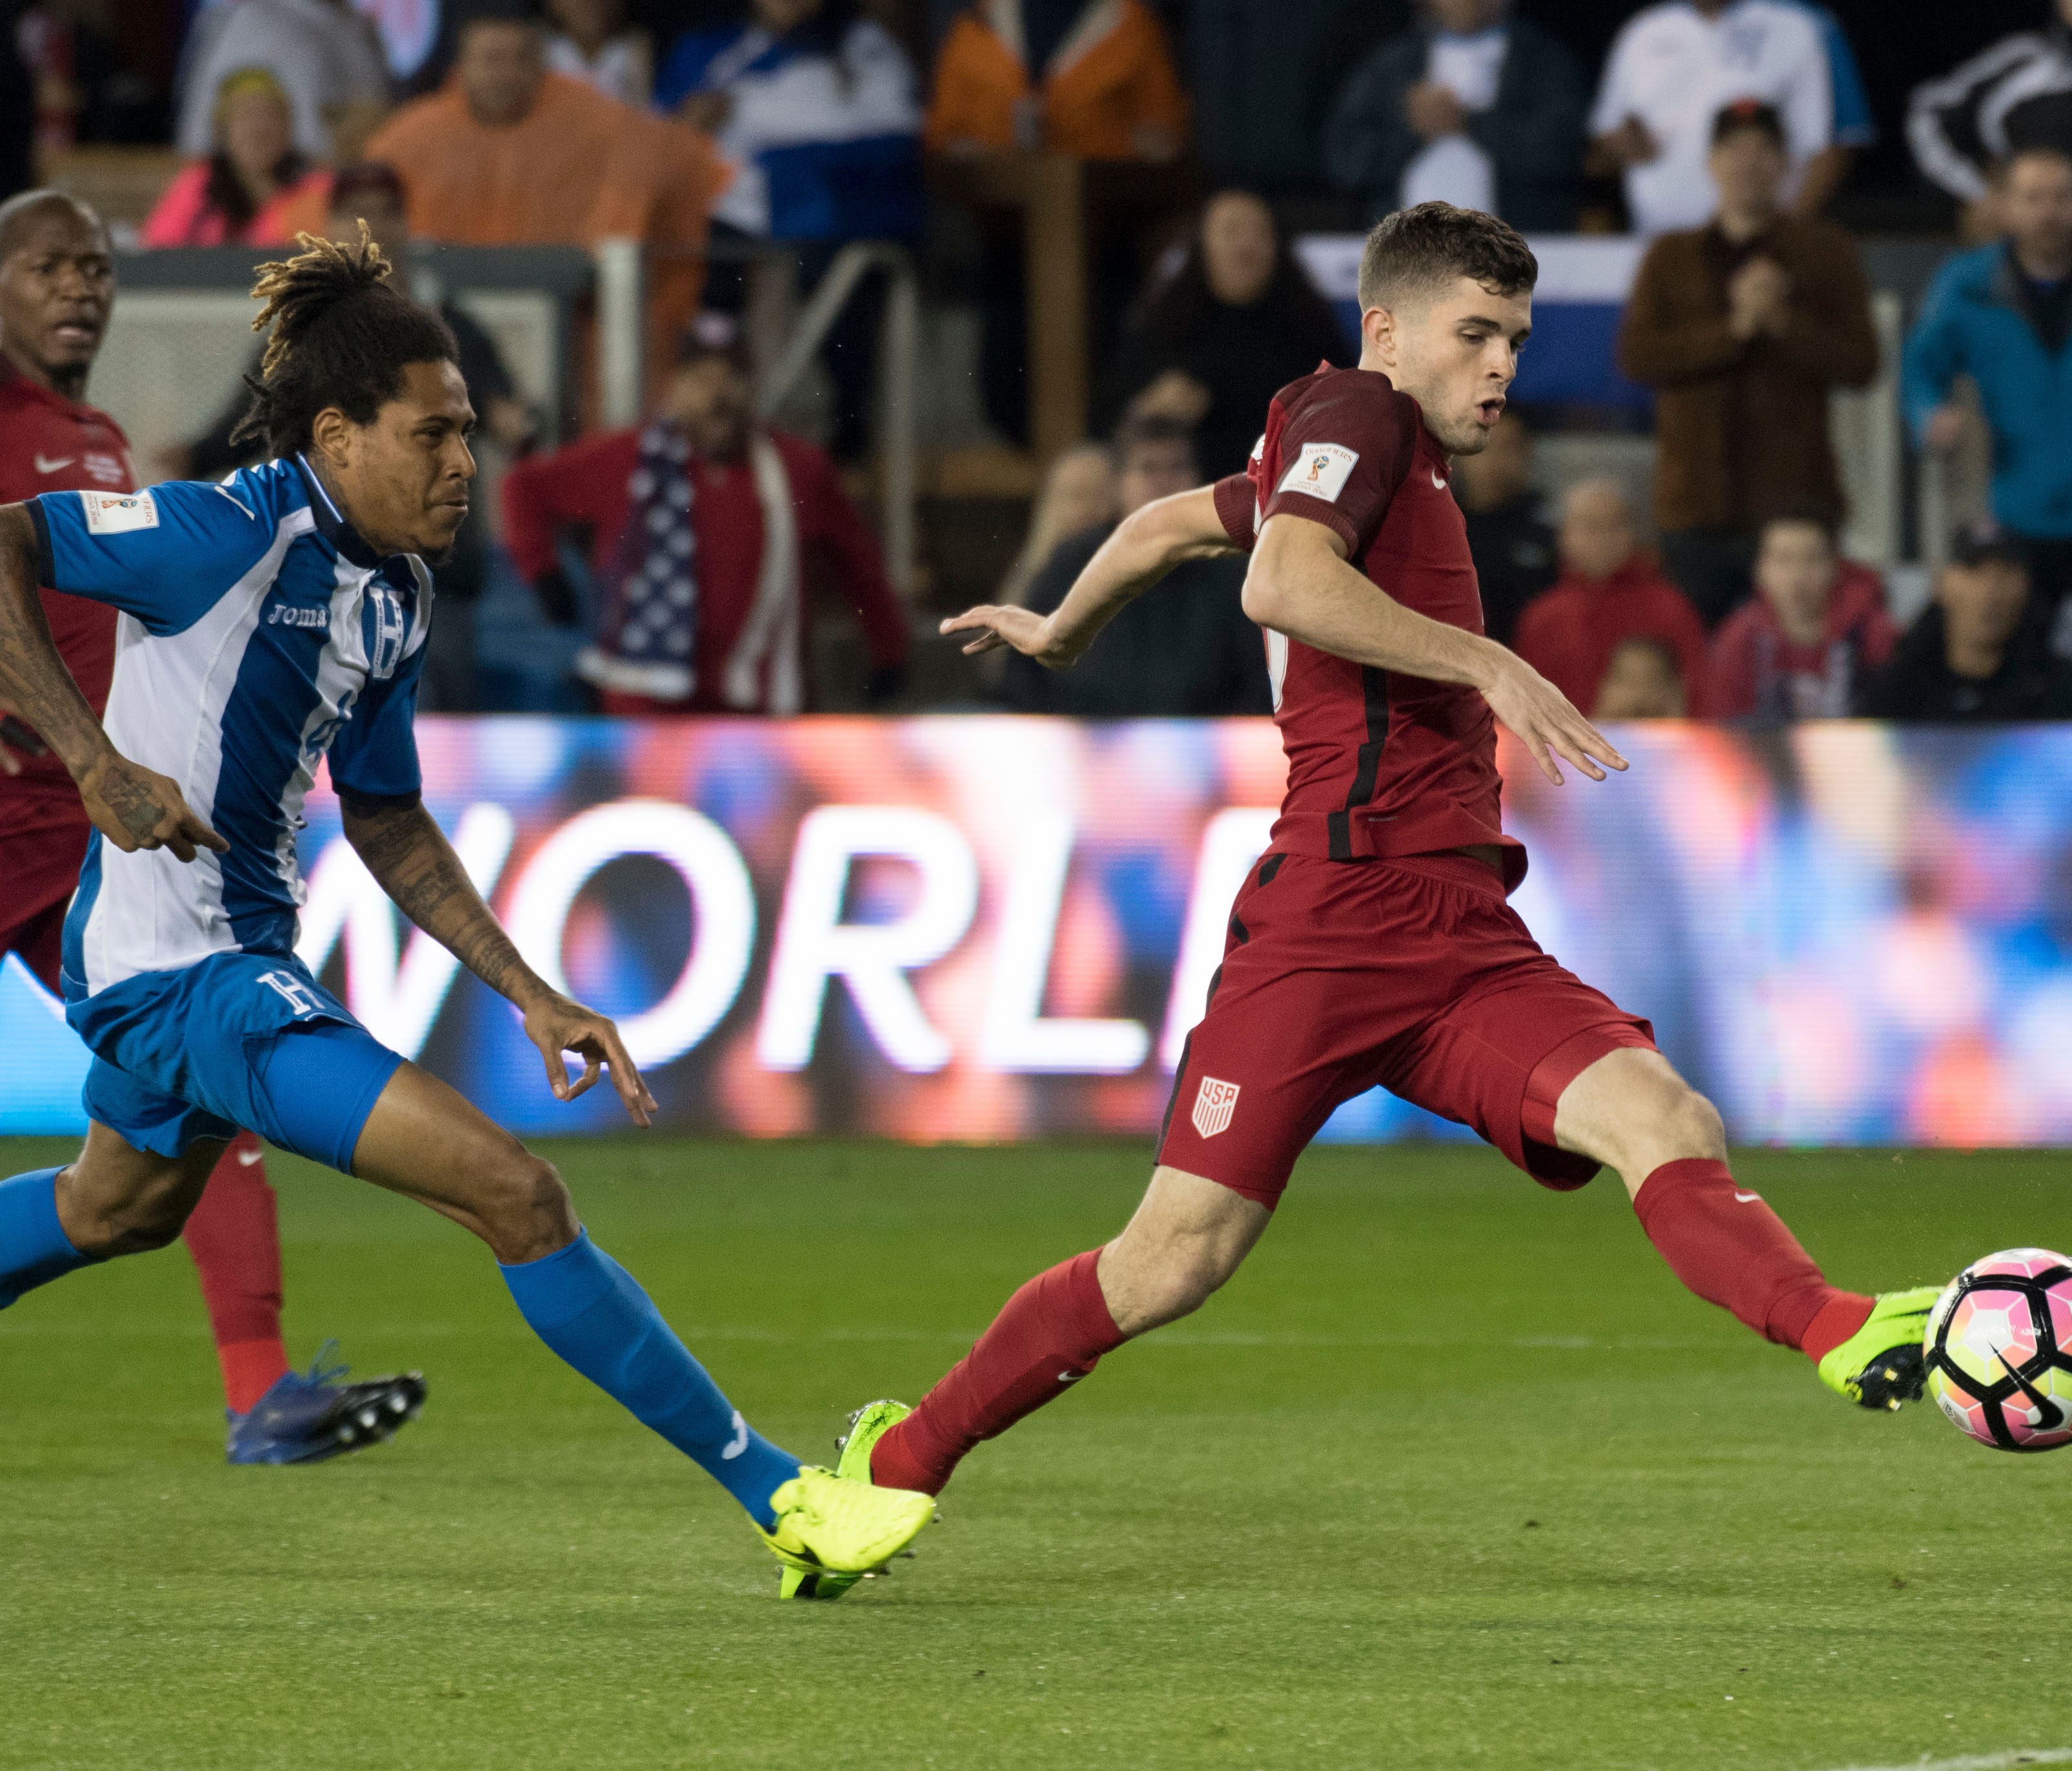 United States midfielder Christian Pulisic (10) kicks the ball against Honduras defender Henry Figueroa (4) during the first half of the Men's World Cup Soccer Qualifier at Avaya Stadium.